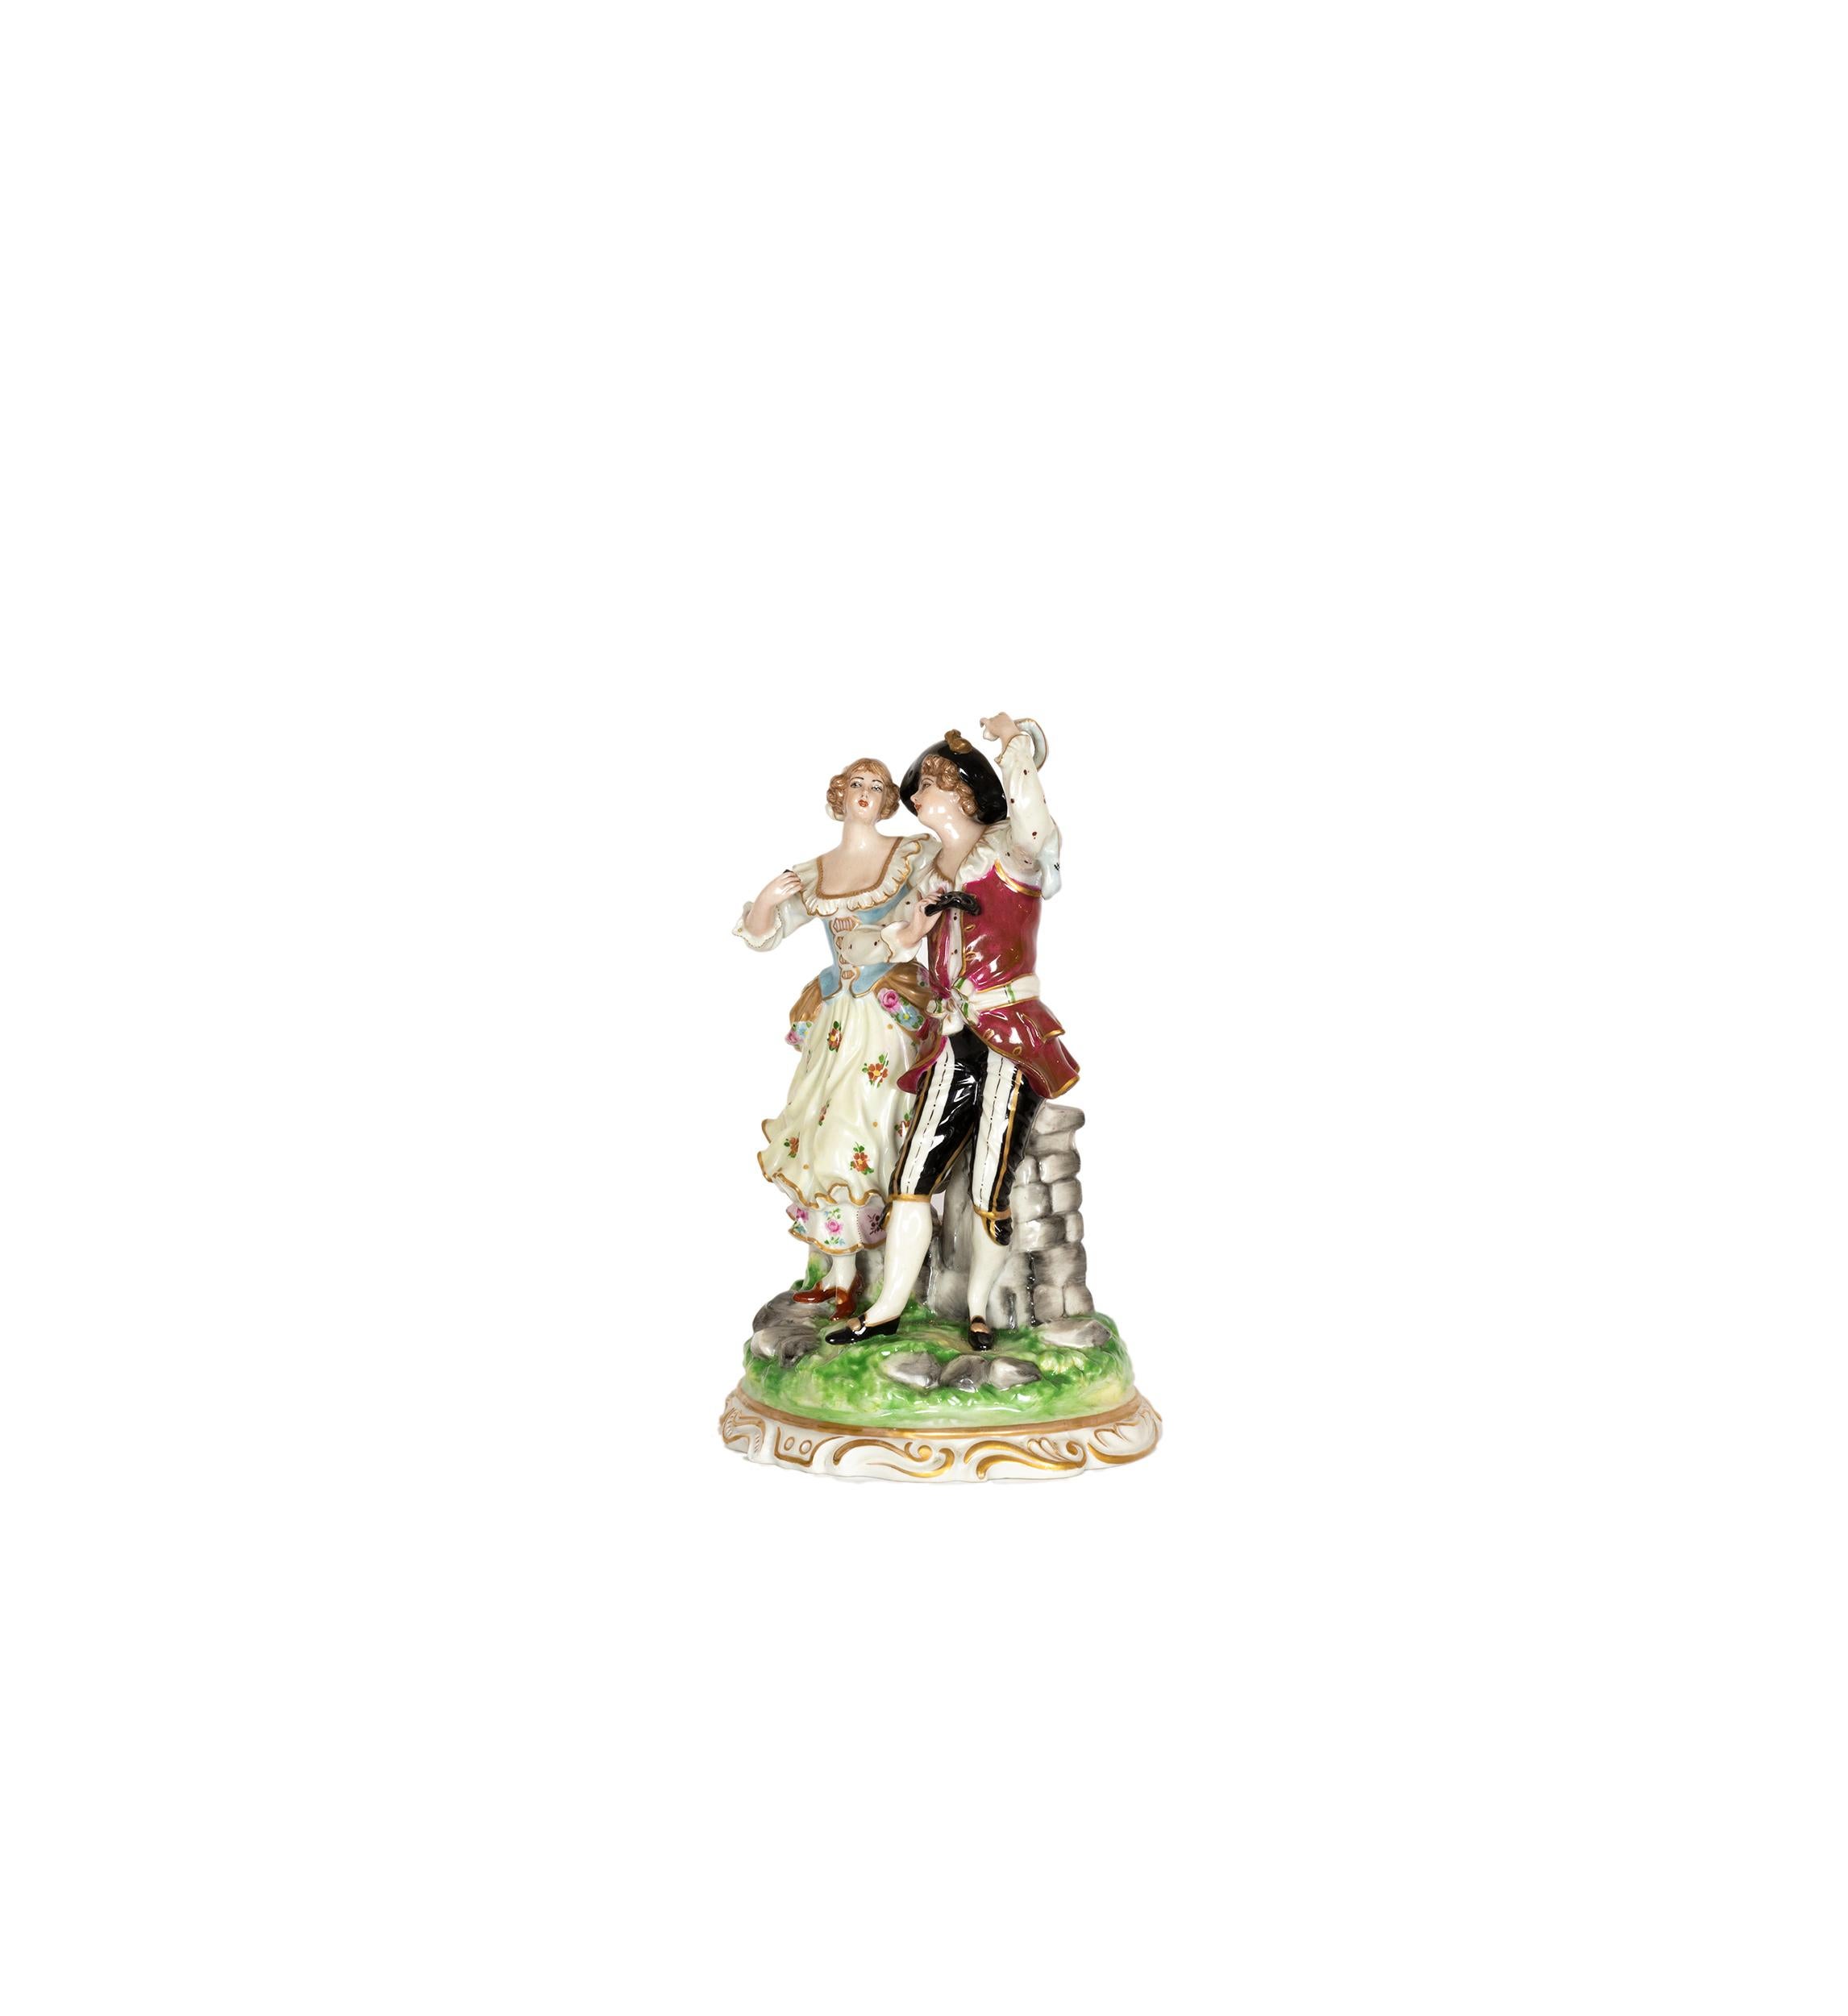 A charming translucent soft-paste german porcelain figurine of a dancing couple of the Volkstedt, Muller & Co, Dresden manufacturing of the late 18th century, mark on the base

